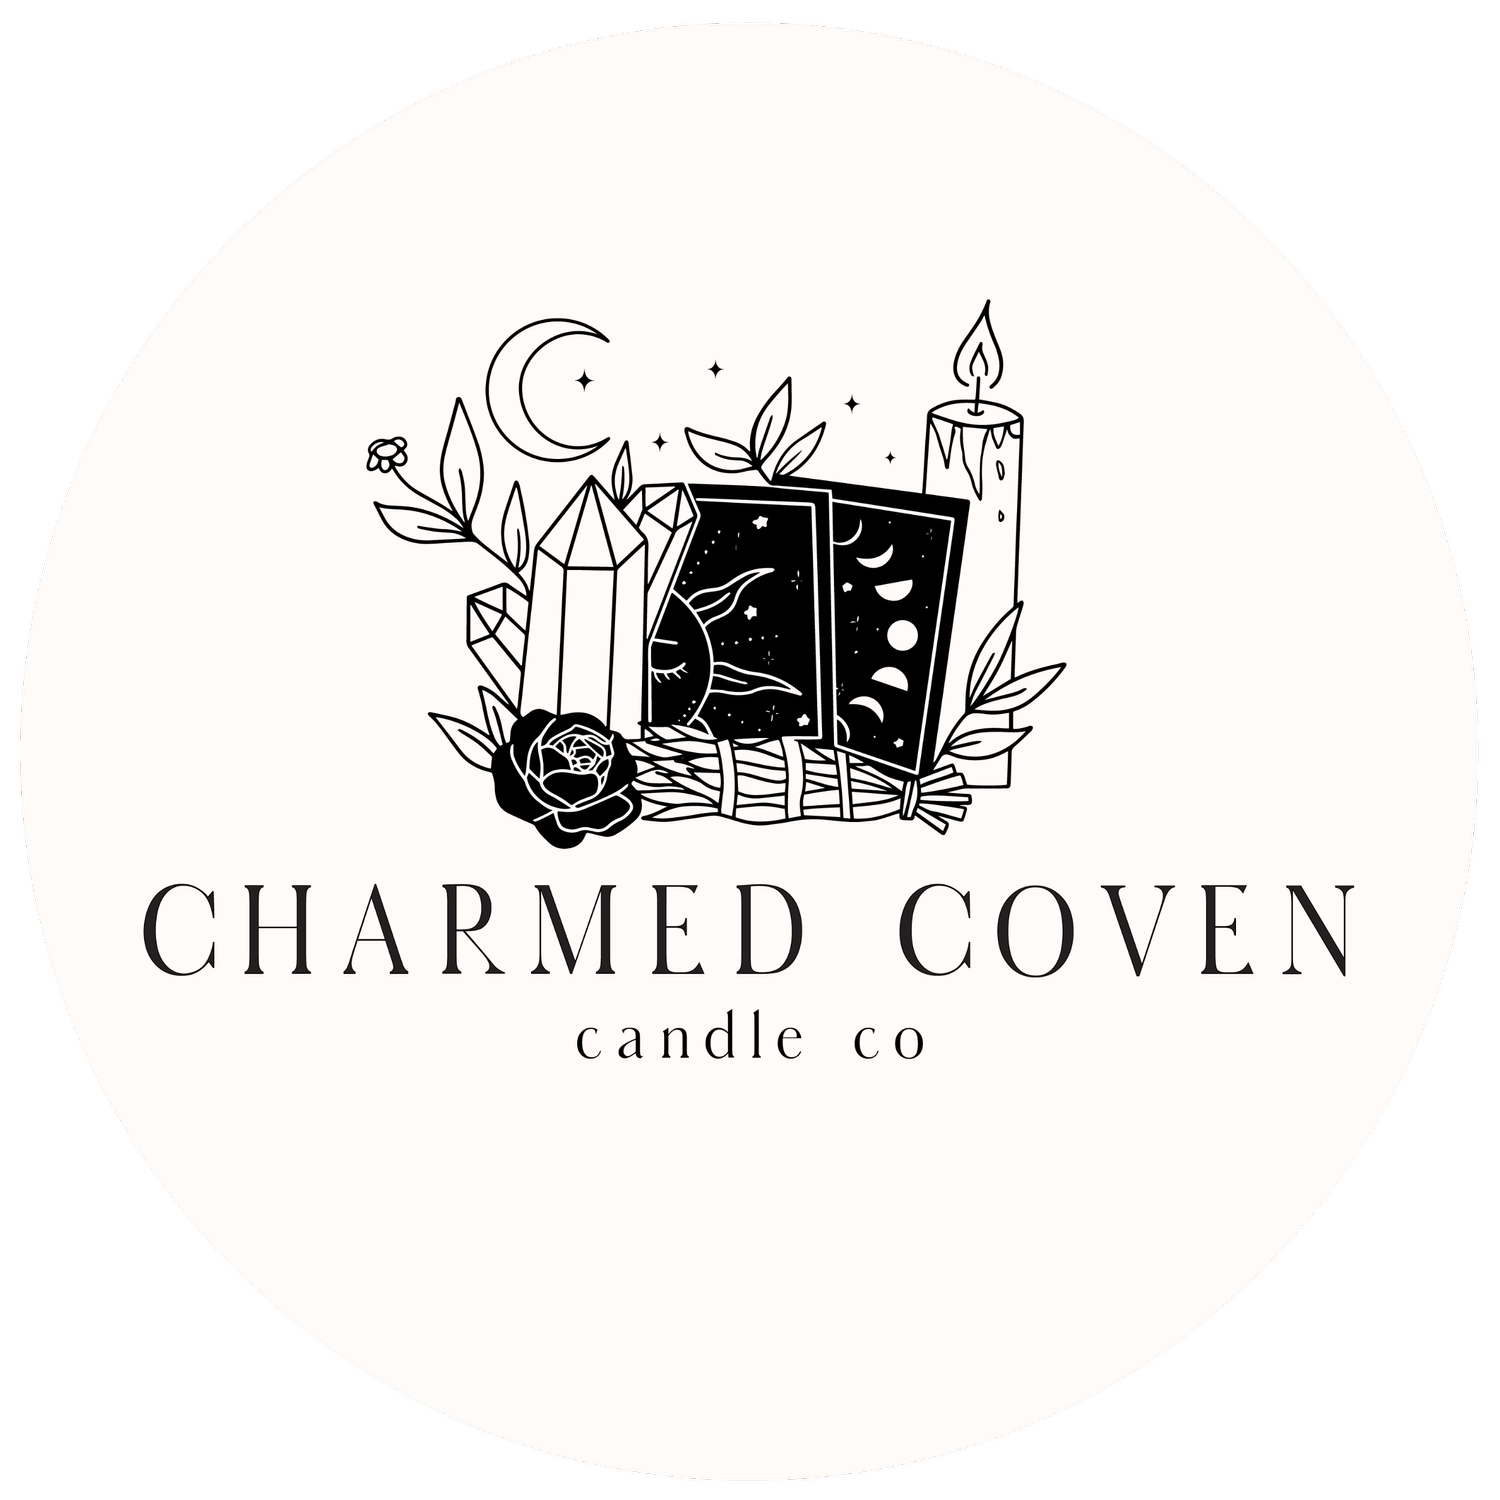 Charmed Coven